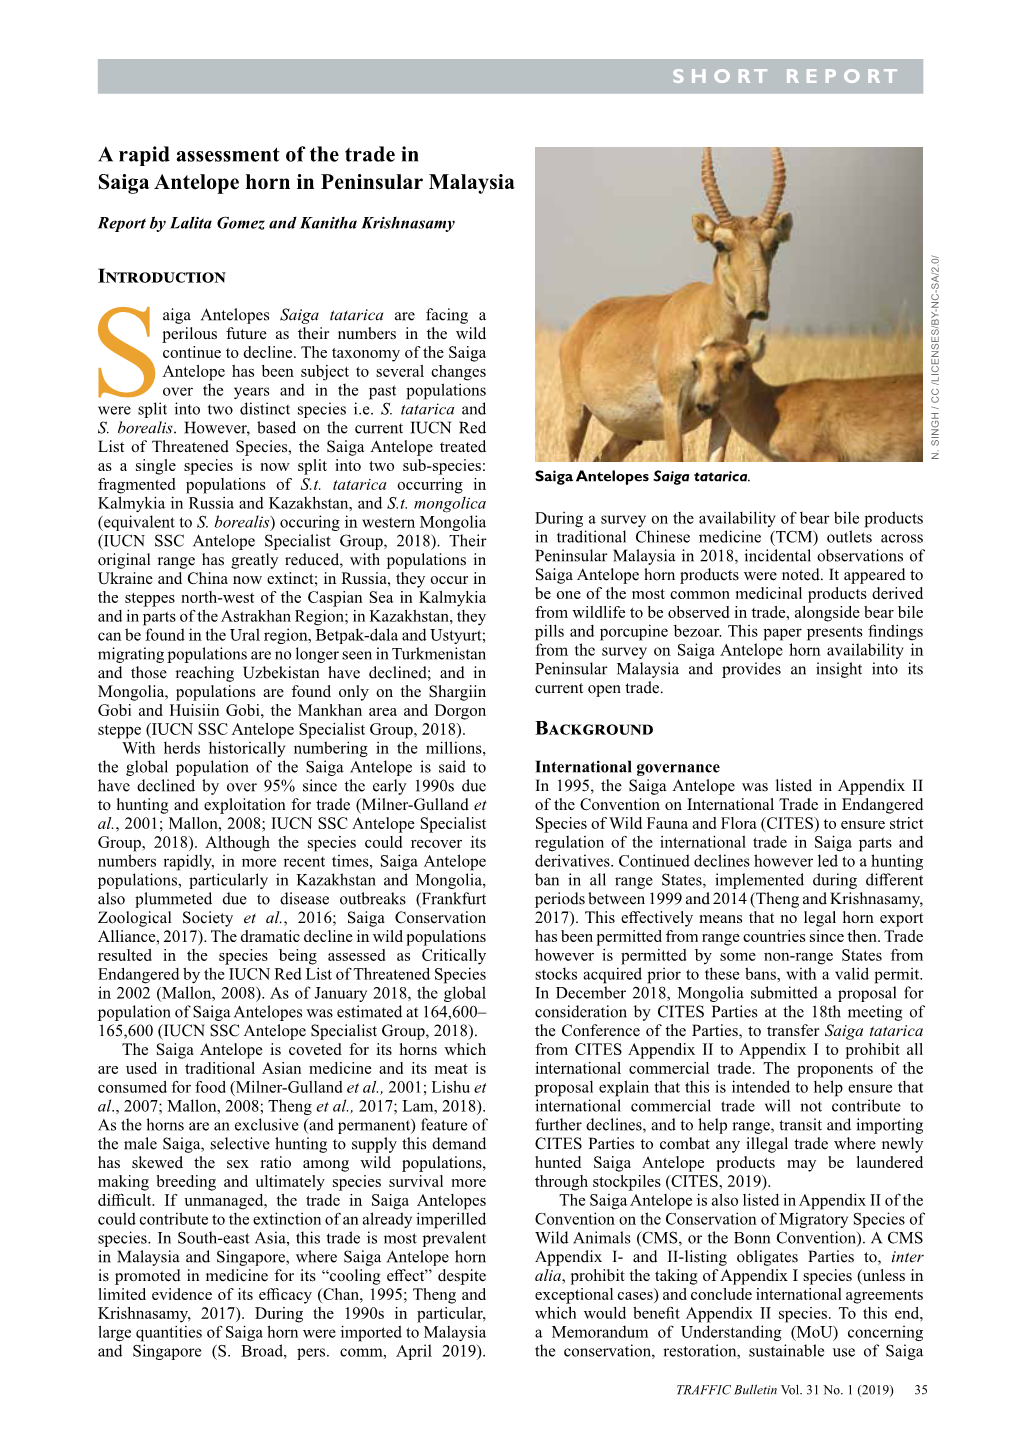 A Rapid Assessment of the Trade in Saiga Antelope Horn in Peninsular Malaysia